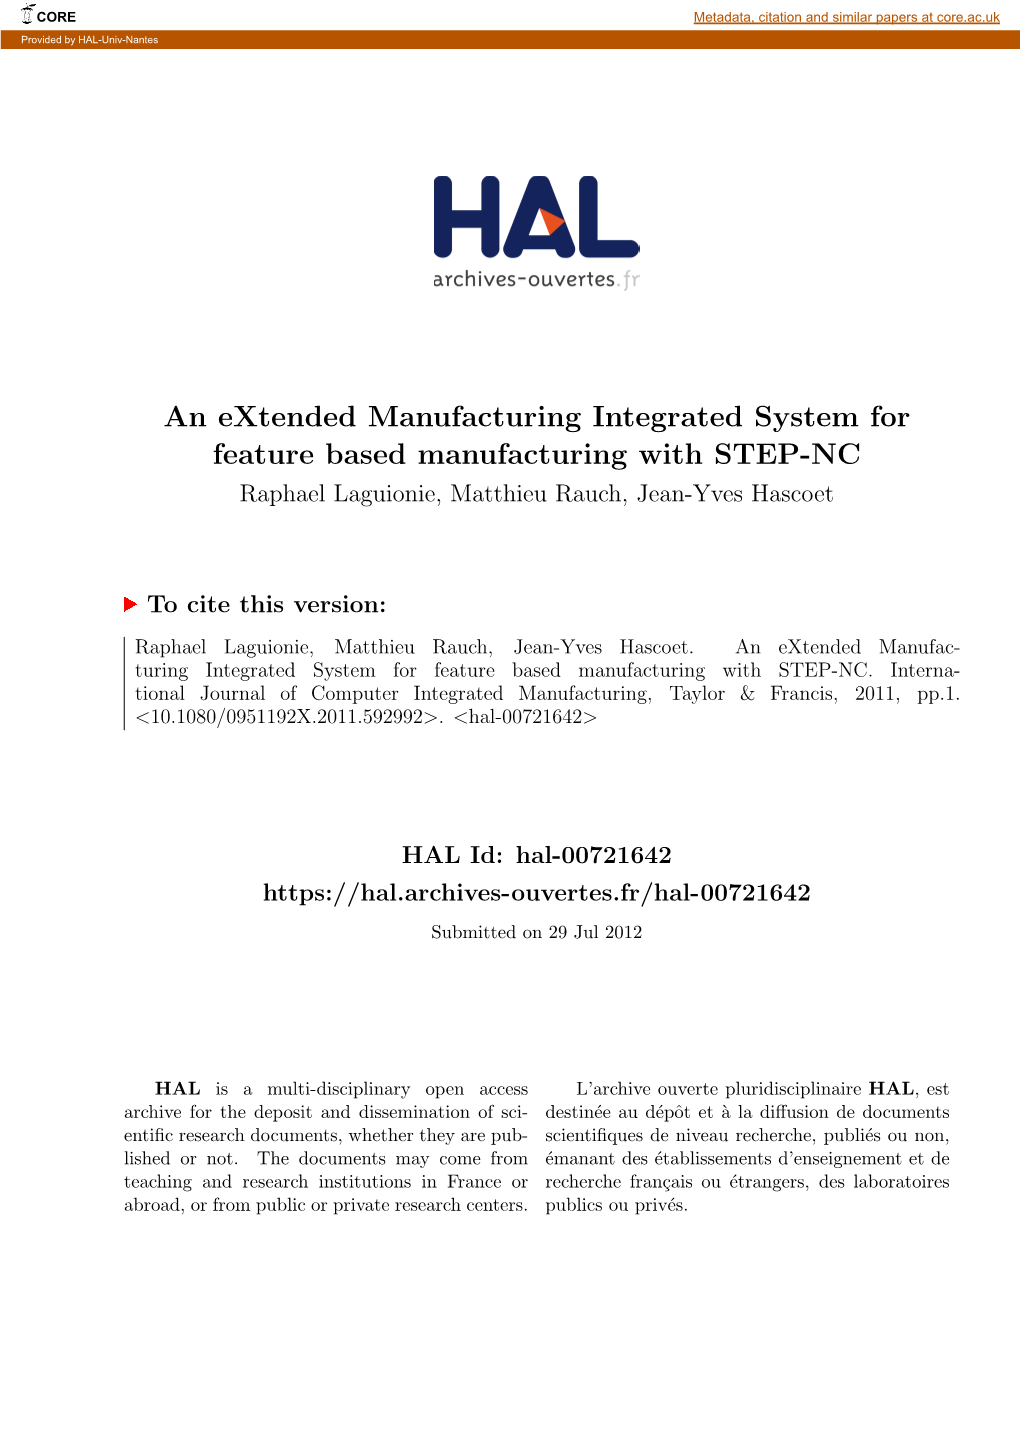 An Extended Manufacturing Integrated System for Feature Based Manufacturing with STEP-NC Raphael Laguionie, Matthieu Rauch, Jean-Yves Hascoet